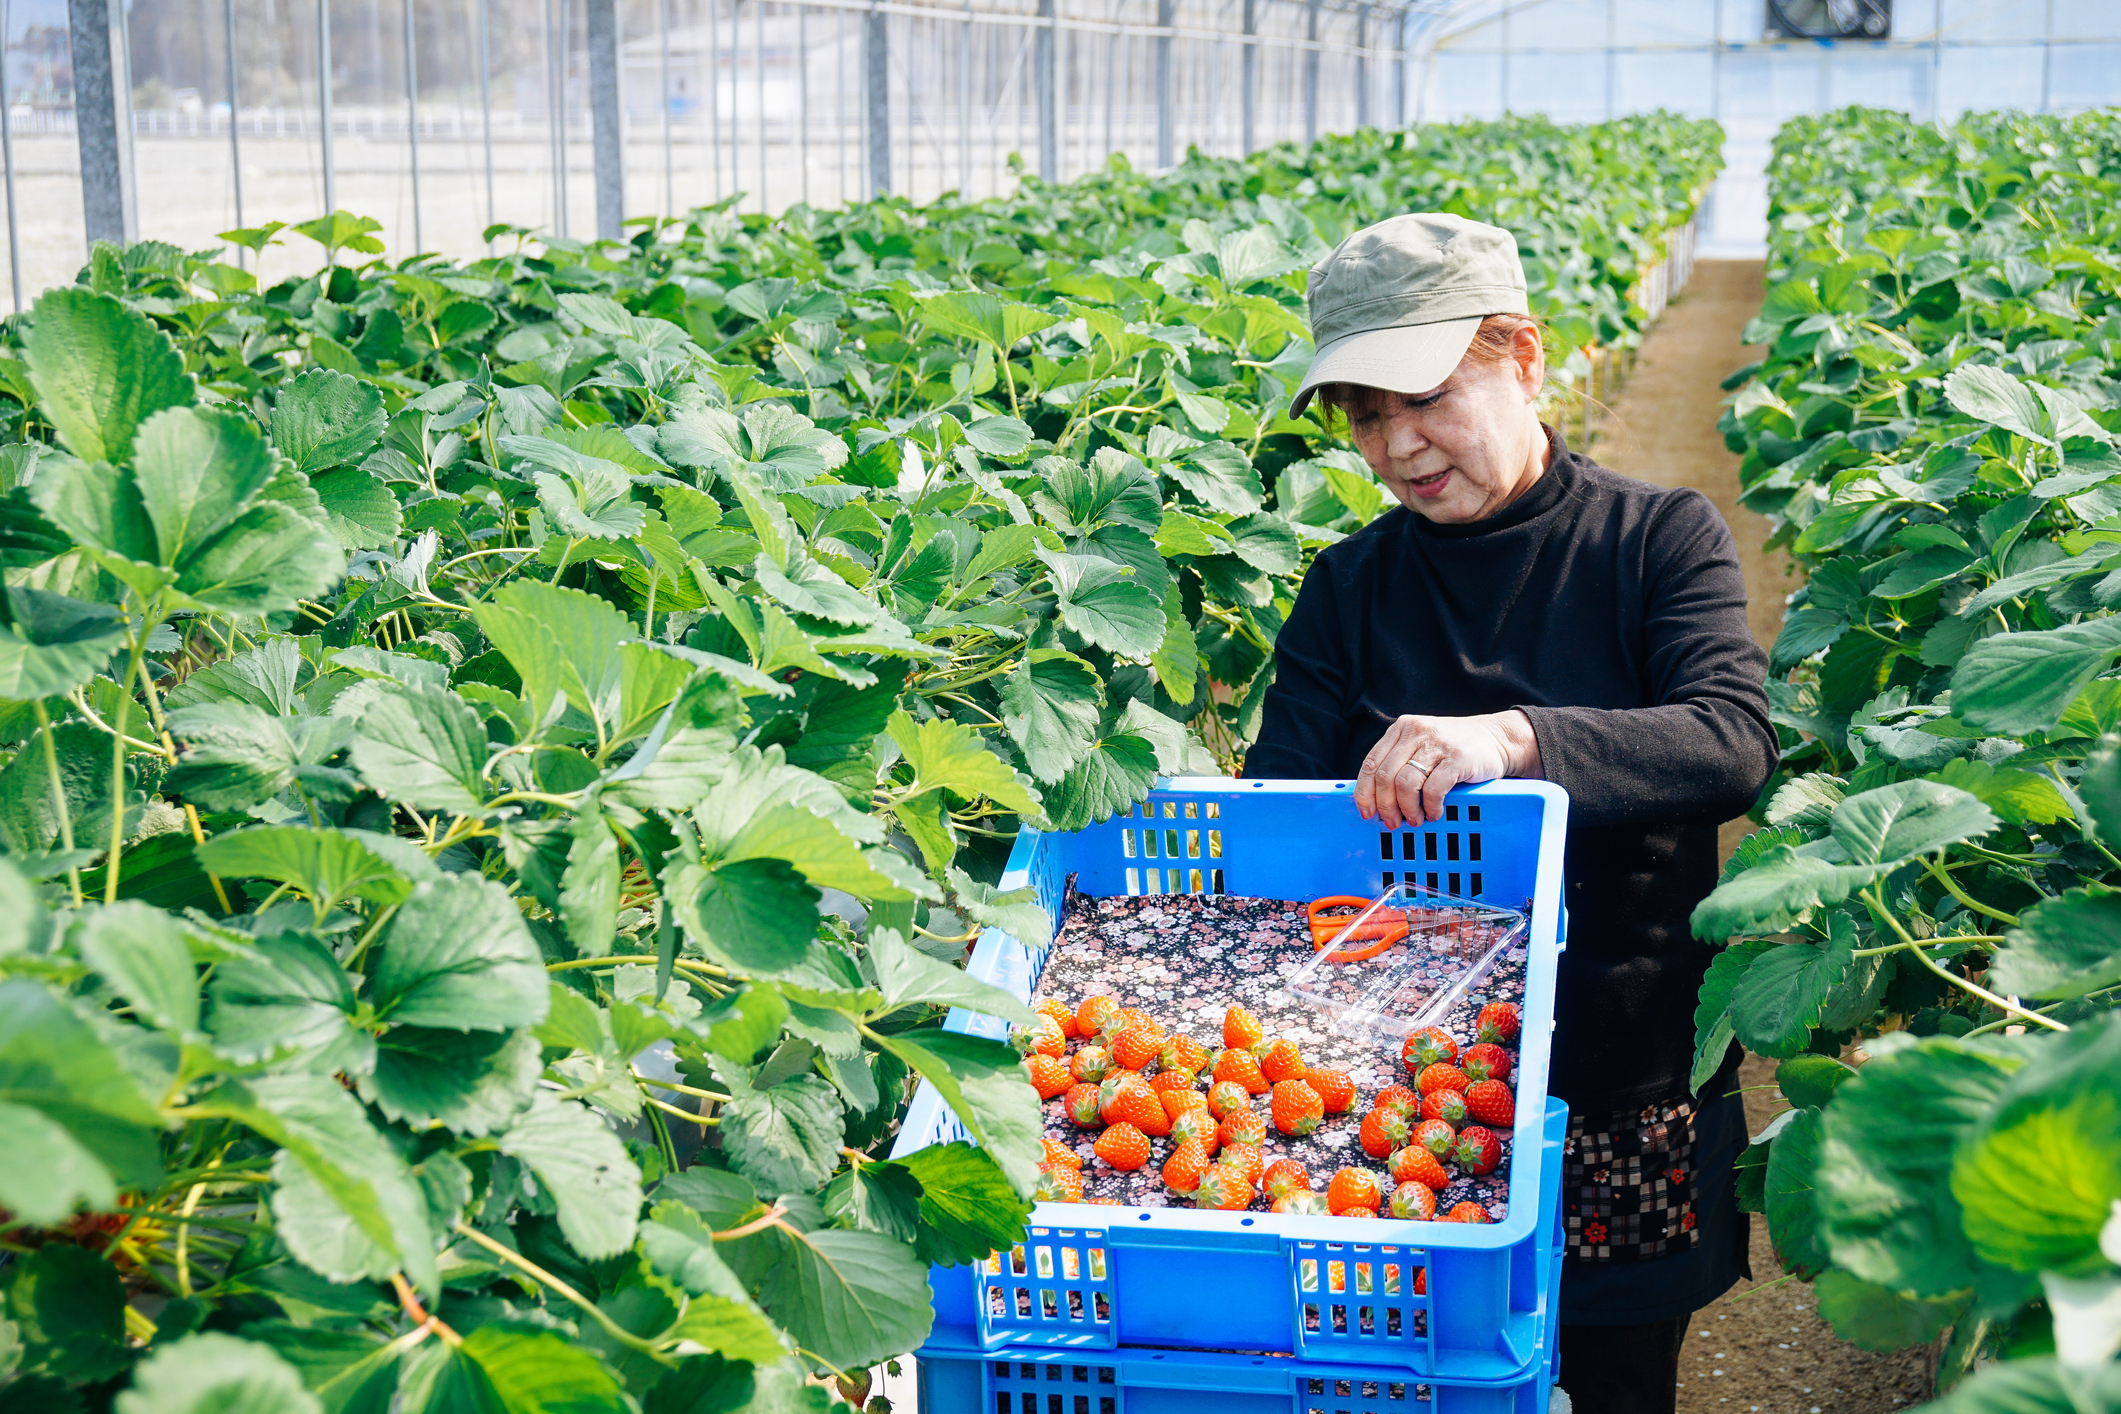 Female farmer collecting strawberries in a large basket at a strawberry farm.